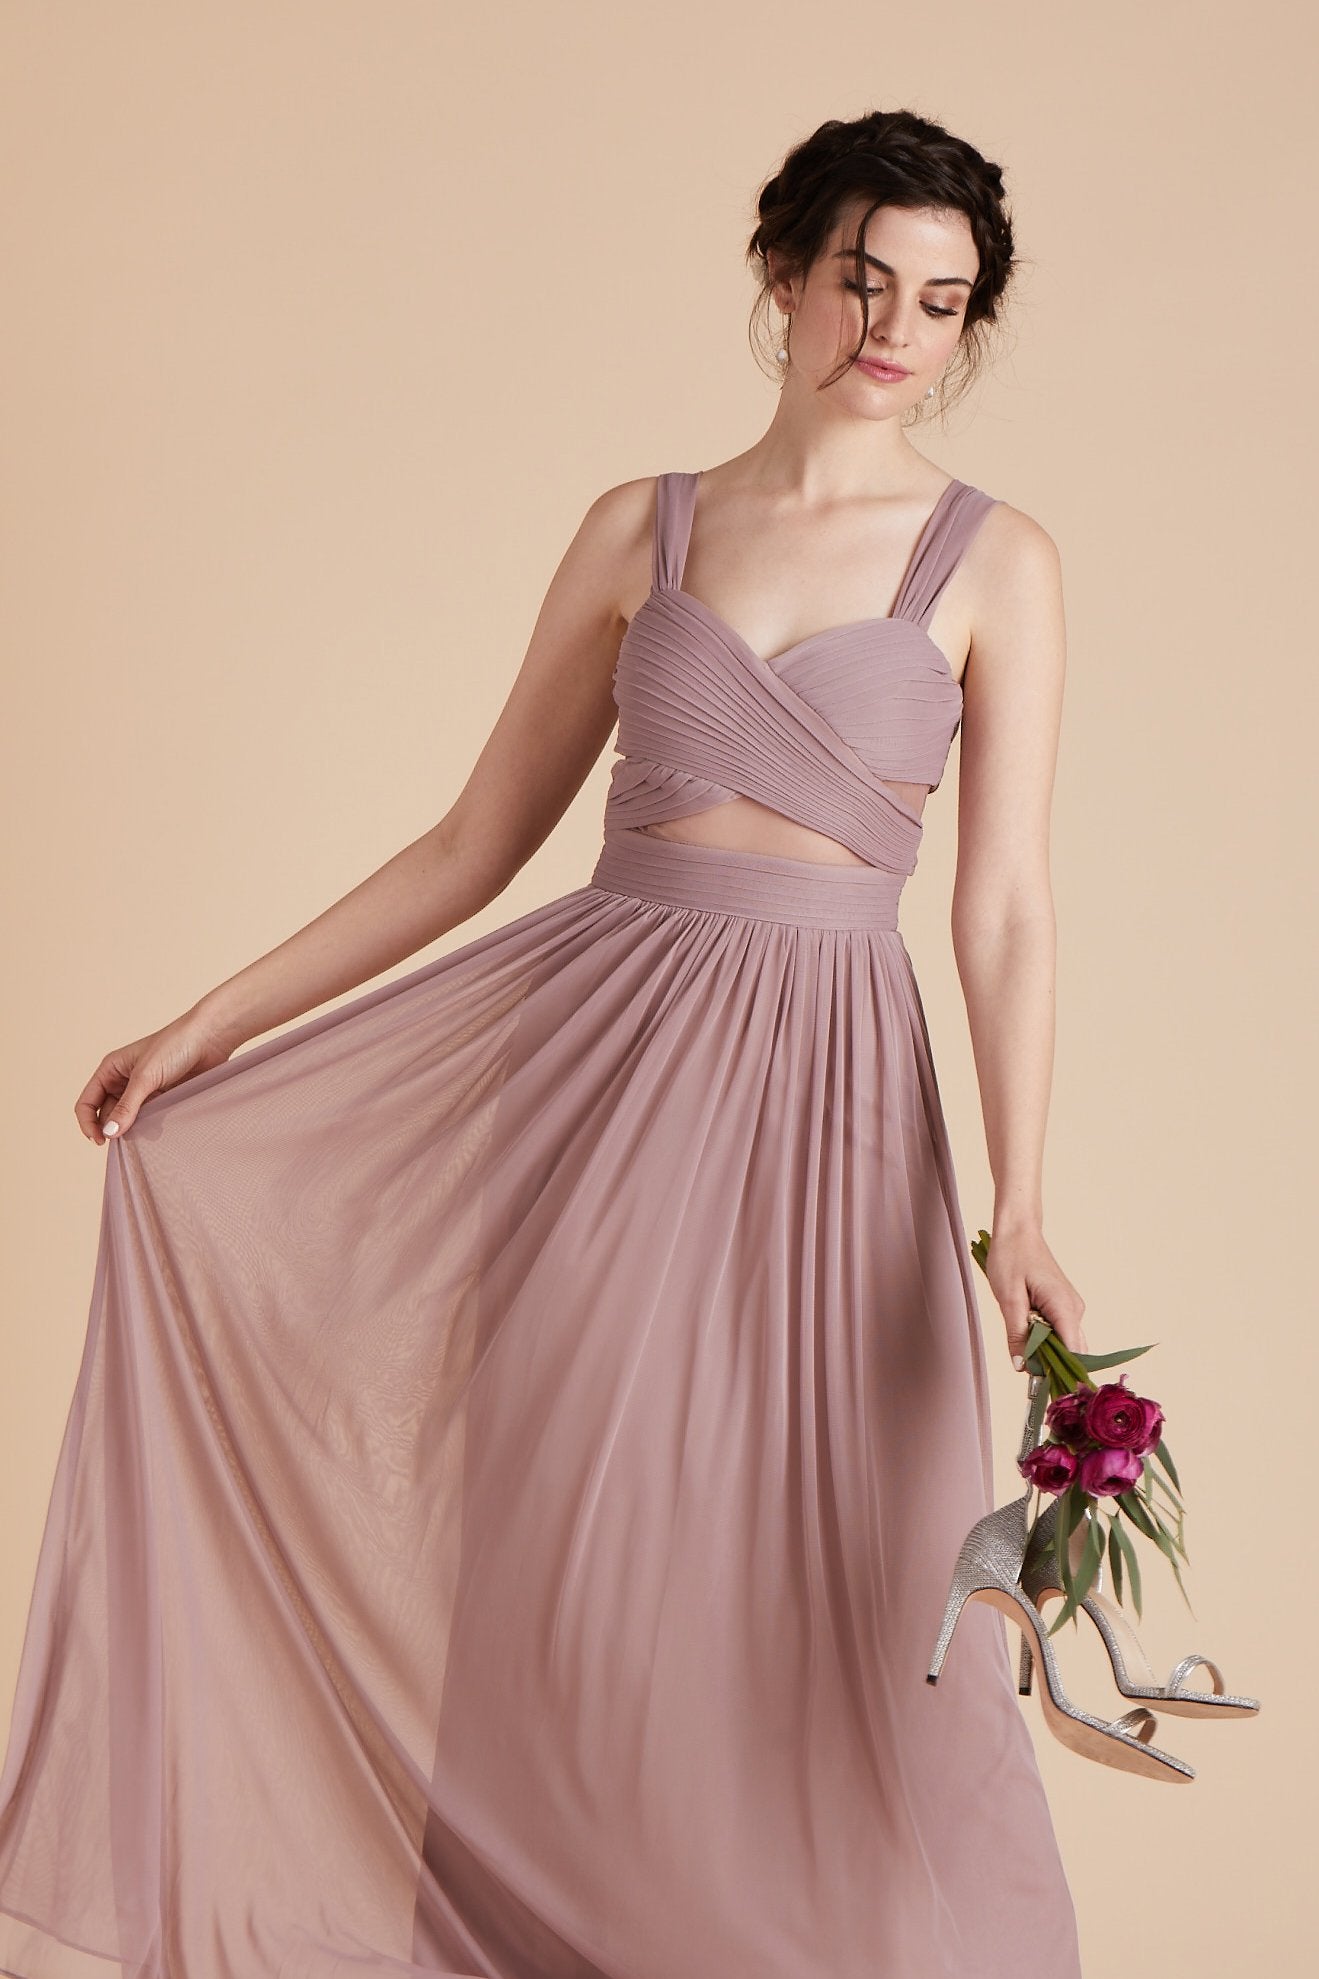 Elsye bridesmaid dress in mauve pink chiffon by Birdy Grey, front view